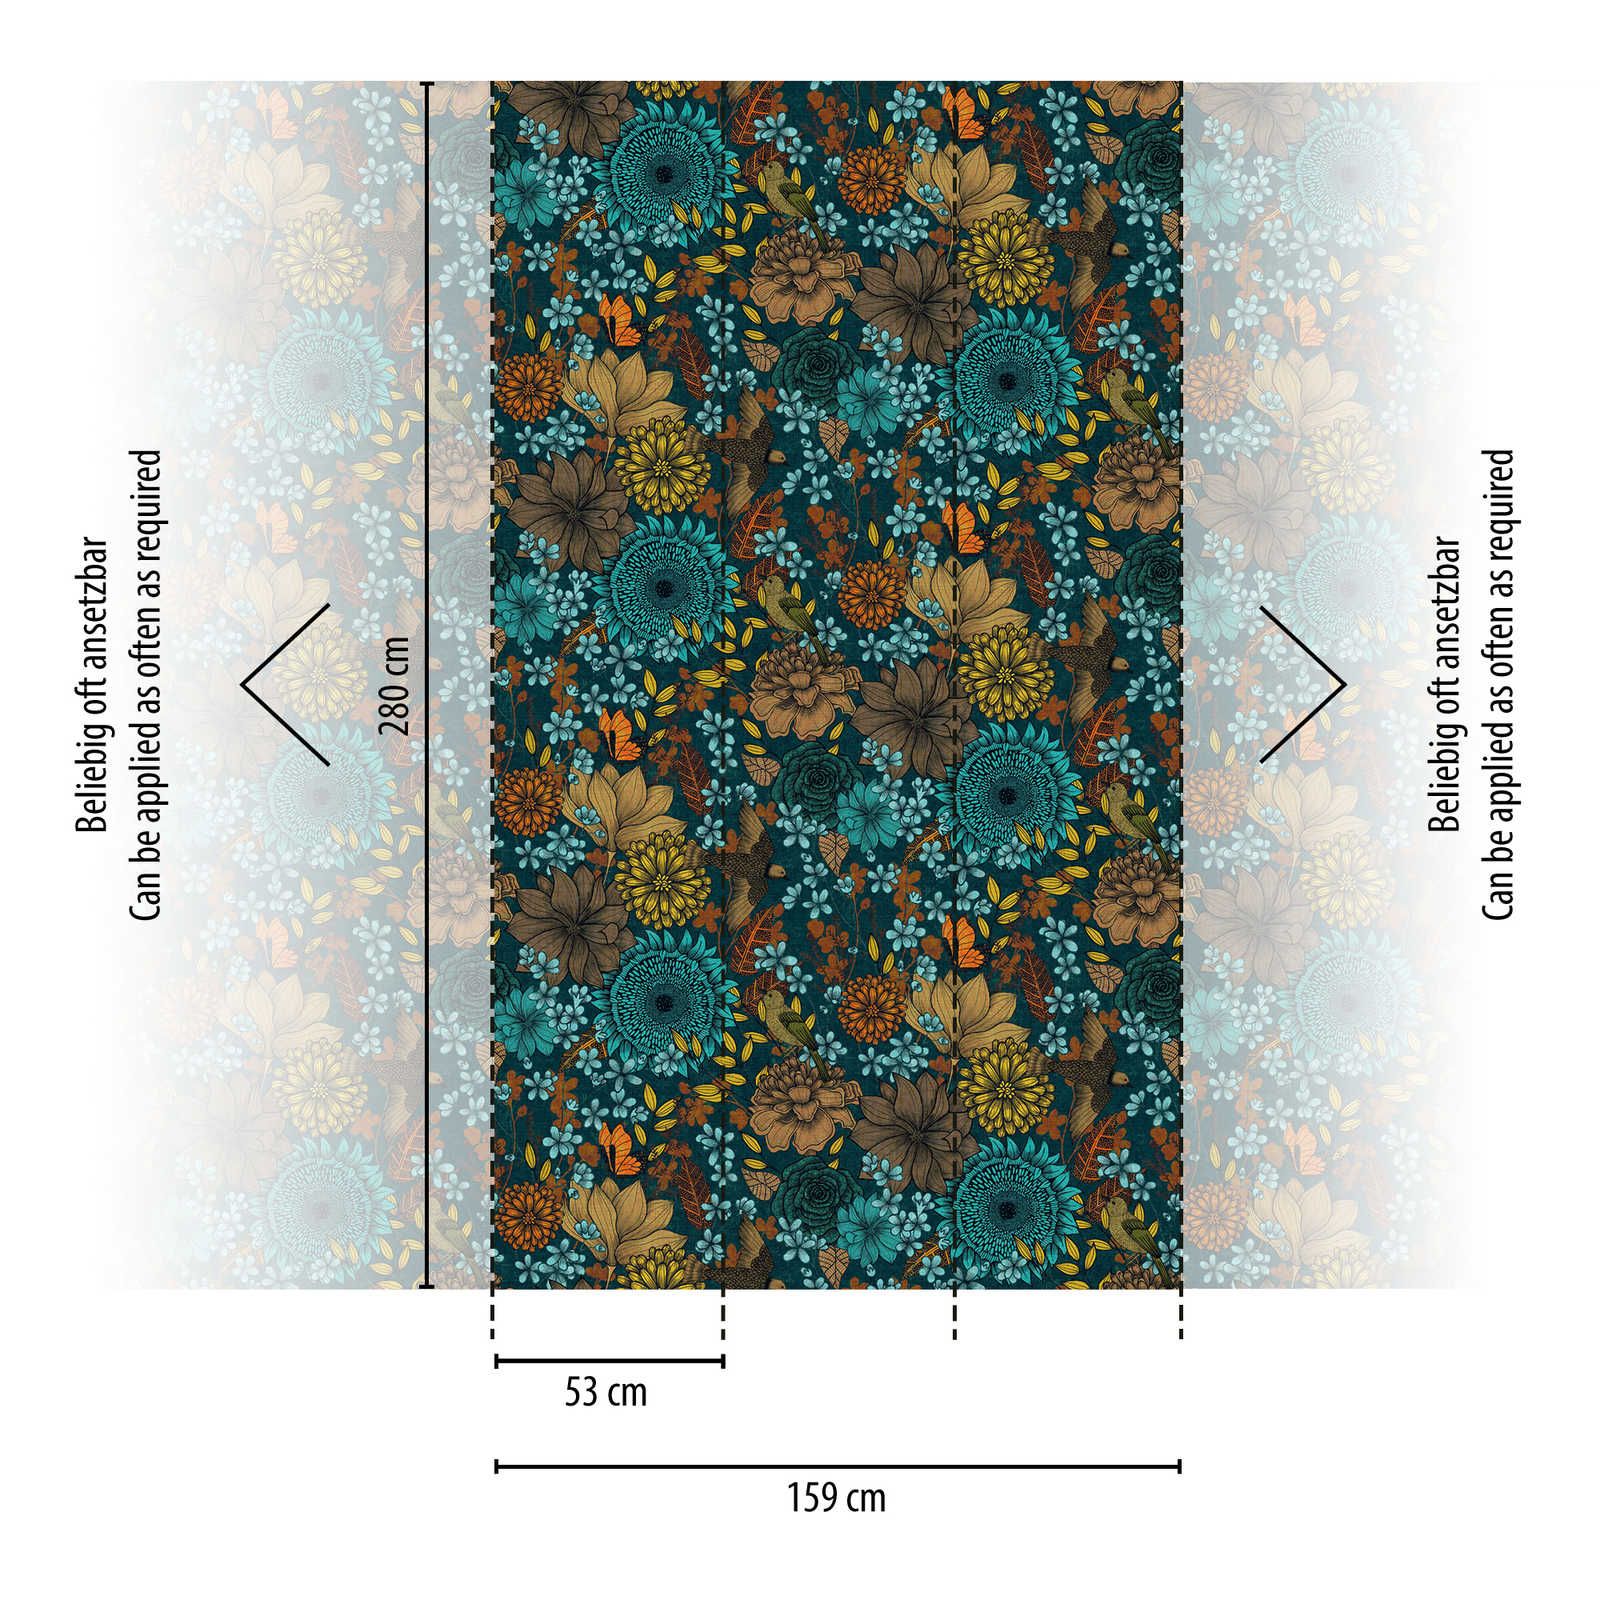             Colourful non-woven wallpaper with large floral pattern with flowers & leaves - blue, beige, brown
        